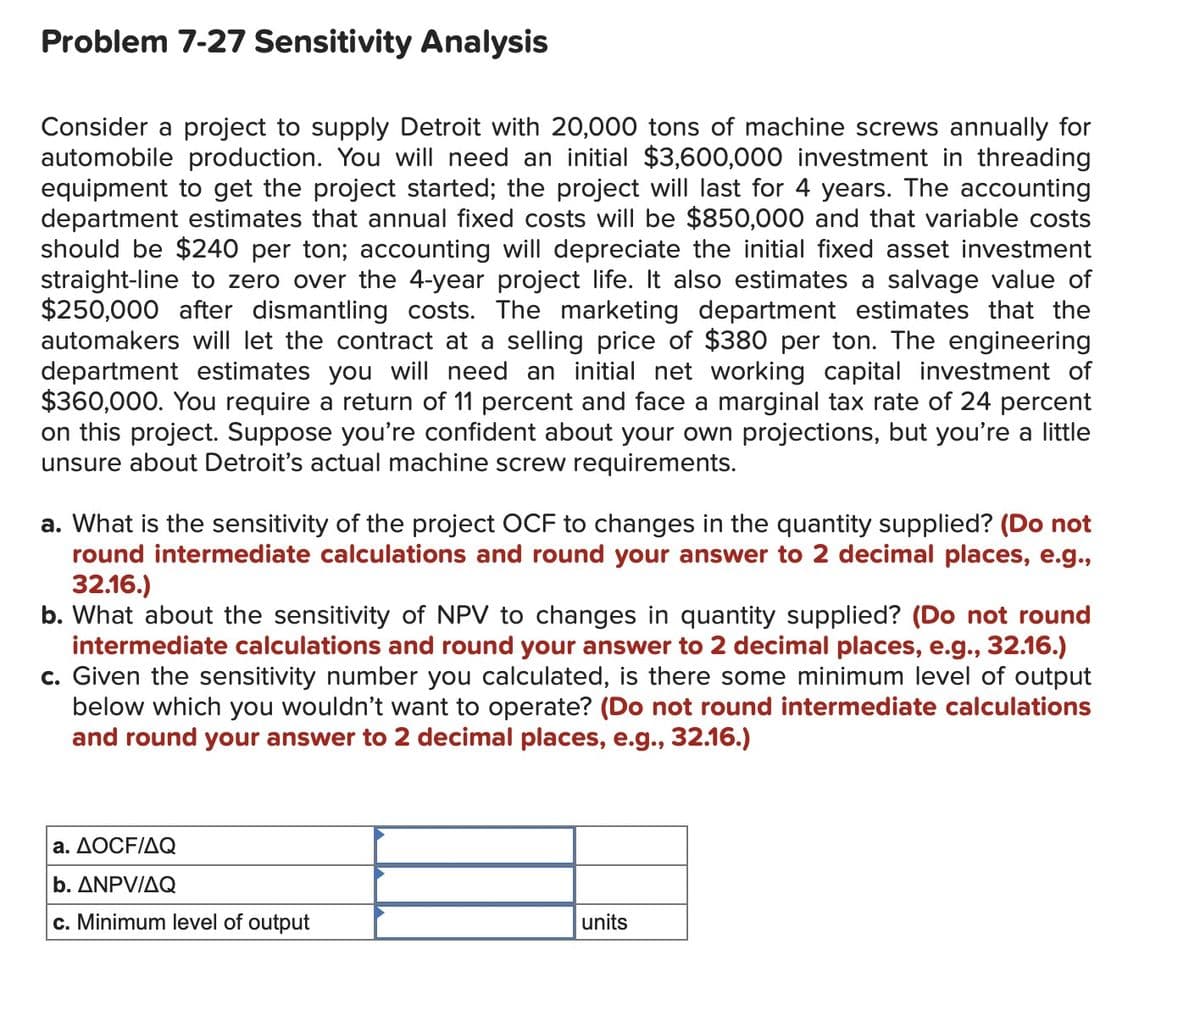 Problem 7-27 Sensitivity Analysis
Consider a project to supply Detroit with 20,000 tons of machine screws annually for
automobile production. You will need an initial $3,600,000 investment in threading
equipment to get the project started; the project will last for 4 years. The accounting
department estimates that annual fixed costs will be $850,000 and that variable costs
should be $240 per ton; accounting will depreciate the initial fixed asset investment
straight-line to zero over the 4-year project life. It also estimates a salvage value of
$250,000 after dismantling costs. The marketing department estimates that the
automakers will let the contract at a selling price of $380 per ton. The engineering
department estimates you will need an initial net working capital investment of
$360,000. You require a return of 11 percent and face a marginal tax rate of 24 percent
on this project. Suppose you're confident about your own projections, but you're a little
unsure about Detroit's actual machine screw requirements.
a. What is the sensitivity of the project OCF to changes in the quantity supplied? (Do not
round intermediate calculations and round your answer to 2 decimal places, e.g.,
32.16.)
b. What about the sensitivity of NPV to changes in quantity supplied? (Do not round
intermediate calculations and round your answer to 2 decimal places, e.g., 32.16.)
c. Given the sensitivity number you calculated, is there some minimum level of output
below which you wouldn't want to operate? (Do not round intermediate calculations
and round your answer to 2 decimal places, e.g., 32.16.)
a. AOCF/AQ
b. ANPV/AQ
c. Minimum level of output
units